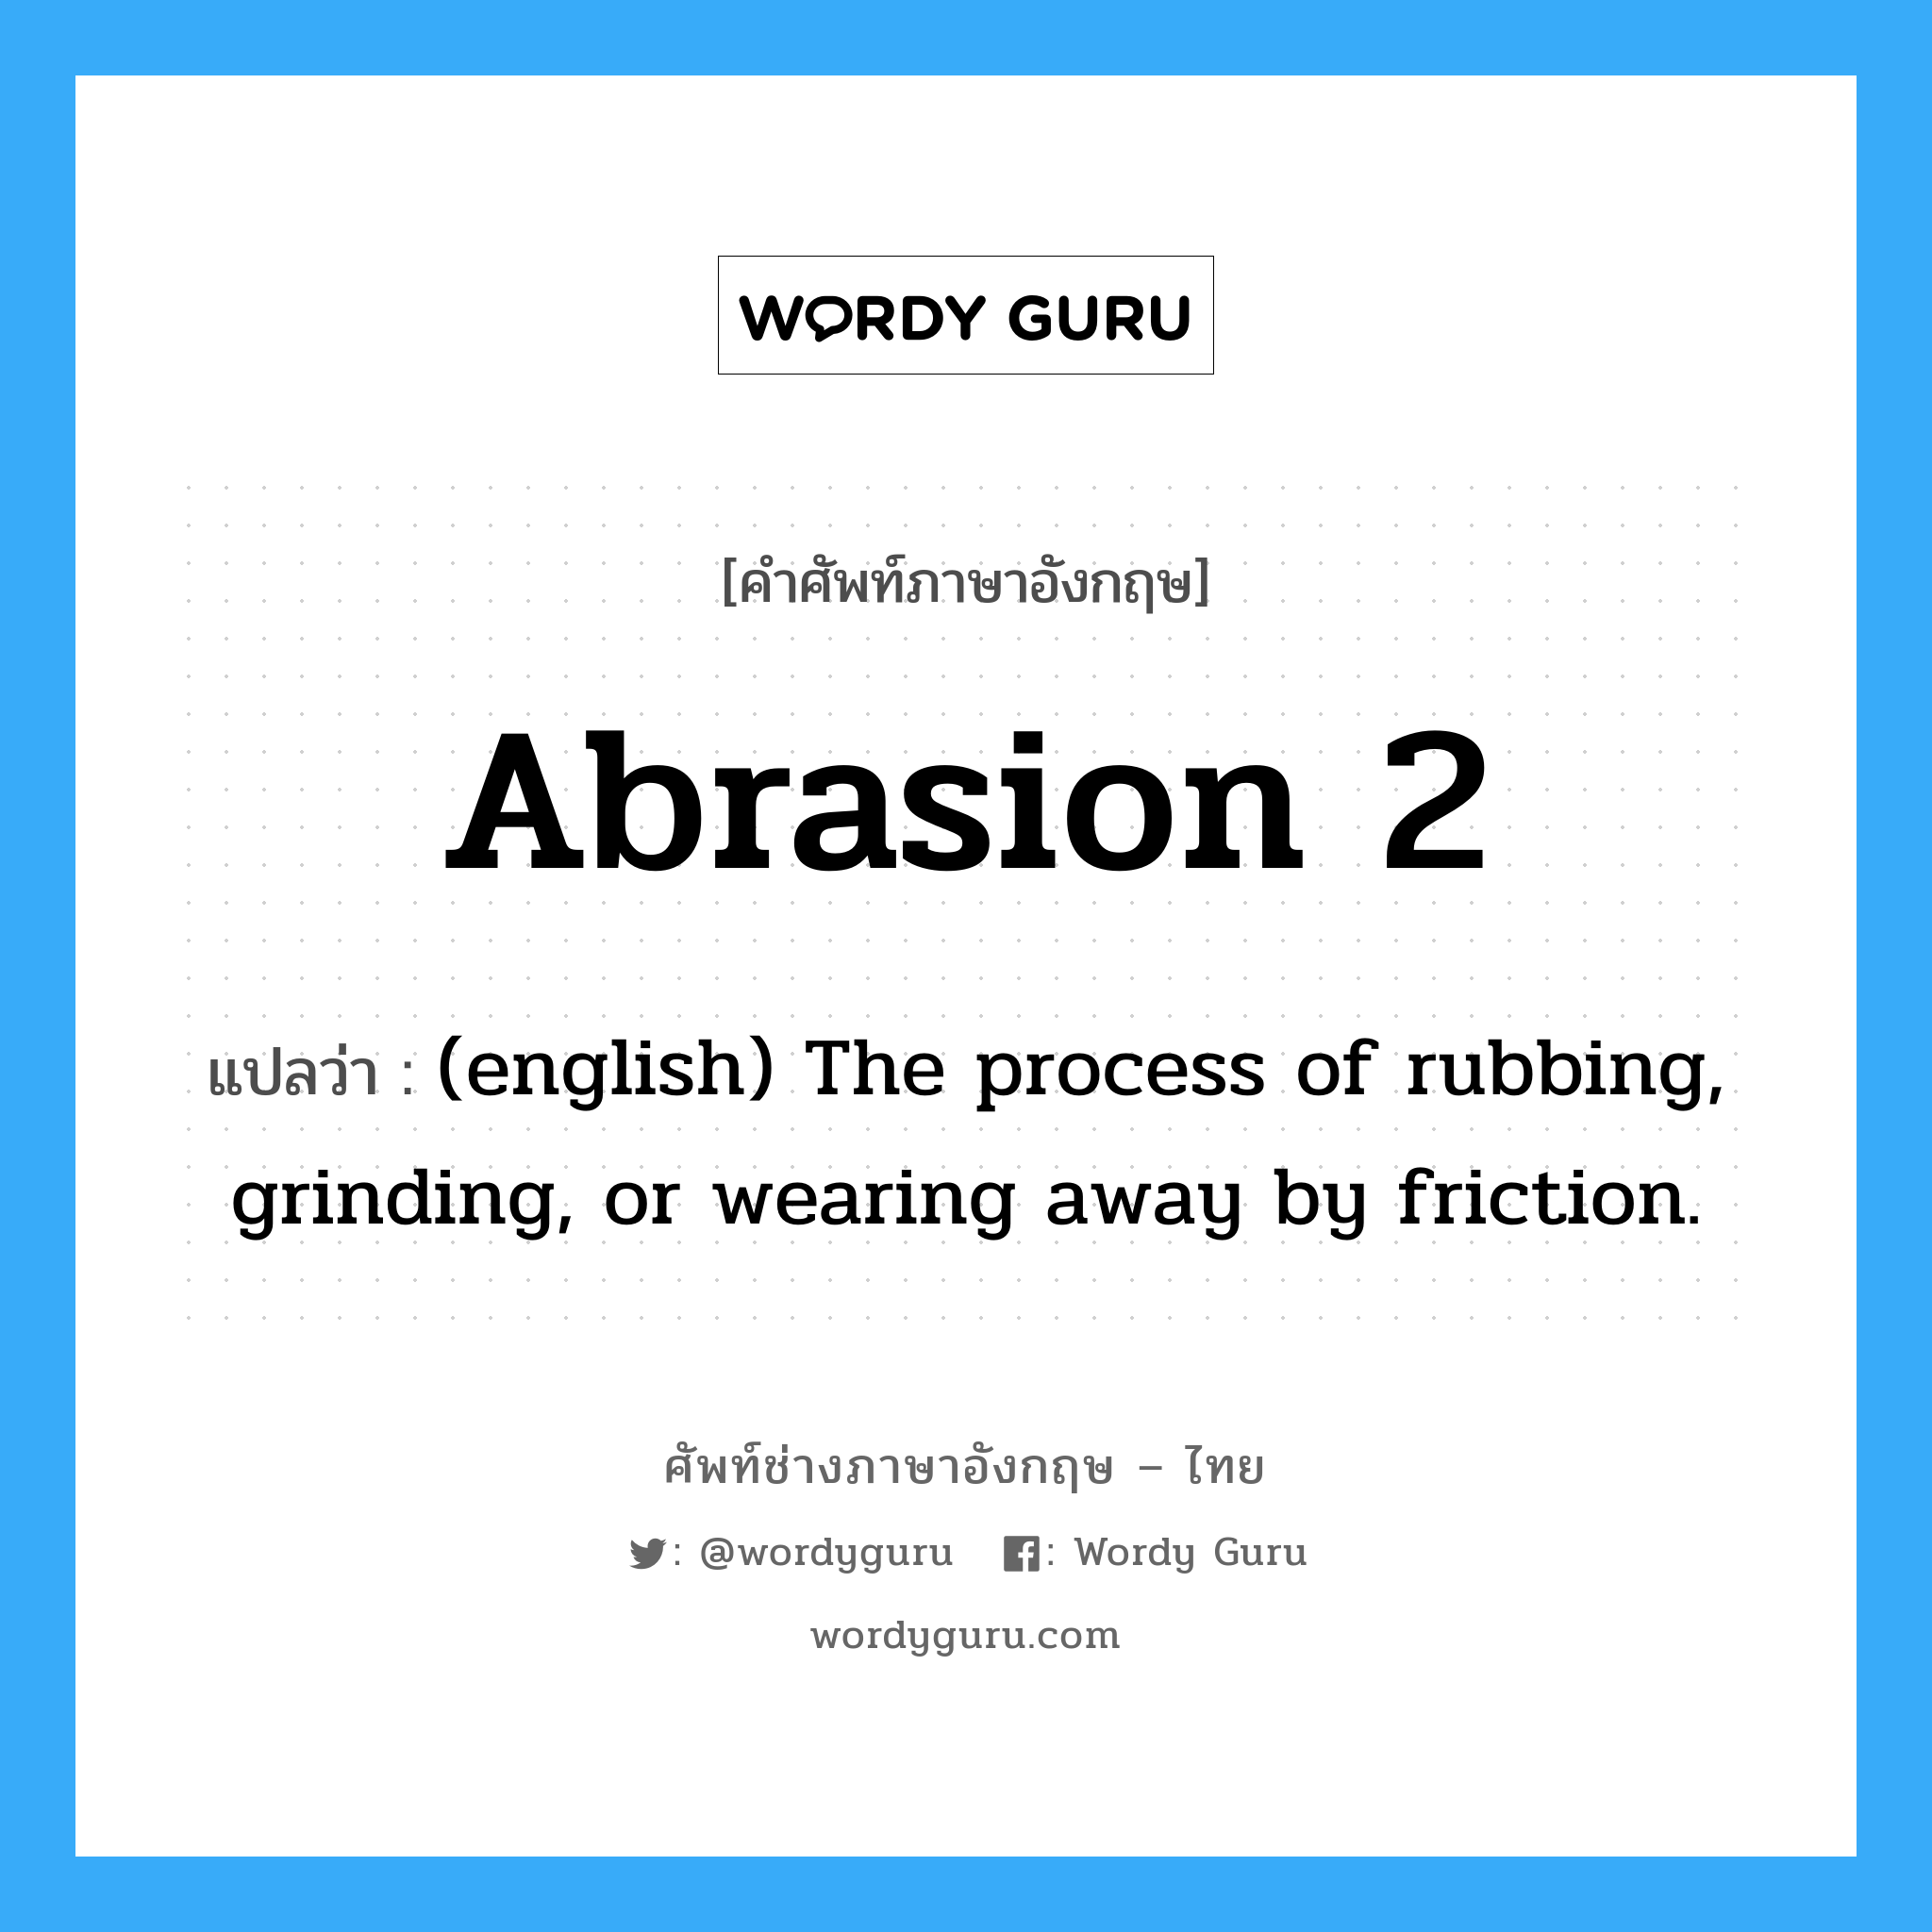 (english) The process of rubbing, grinding, or wearing away by friction. ภาษาอังกฤษ?, คำศัพท์ช่างภาษาอังกฤษ - ไทย (english) The process of rubbing, grinding, or wearing away by friction. คำศัพท์ภาษาอังกฤษ (english) The process of rubbing, grinding, or wearing away by friction. แปลว่า Abrasion 2